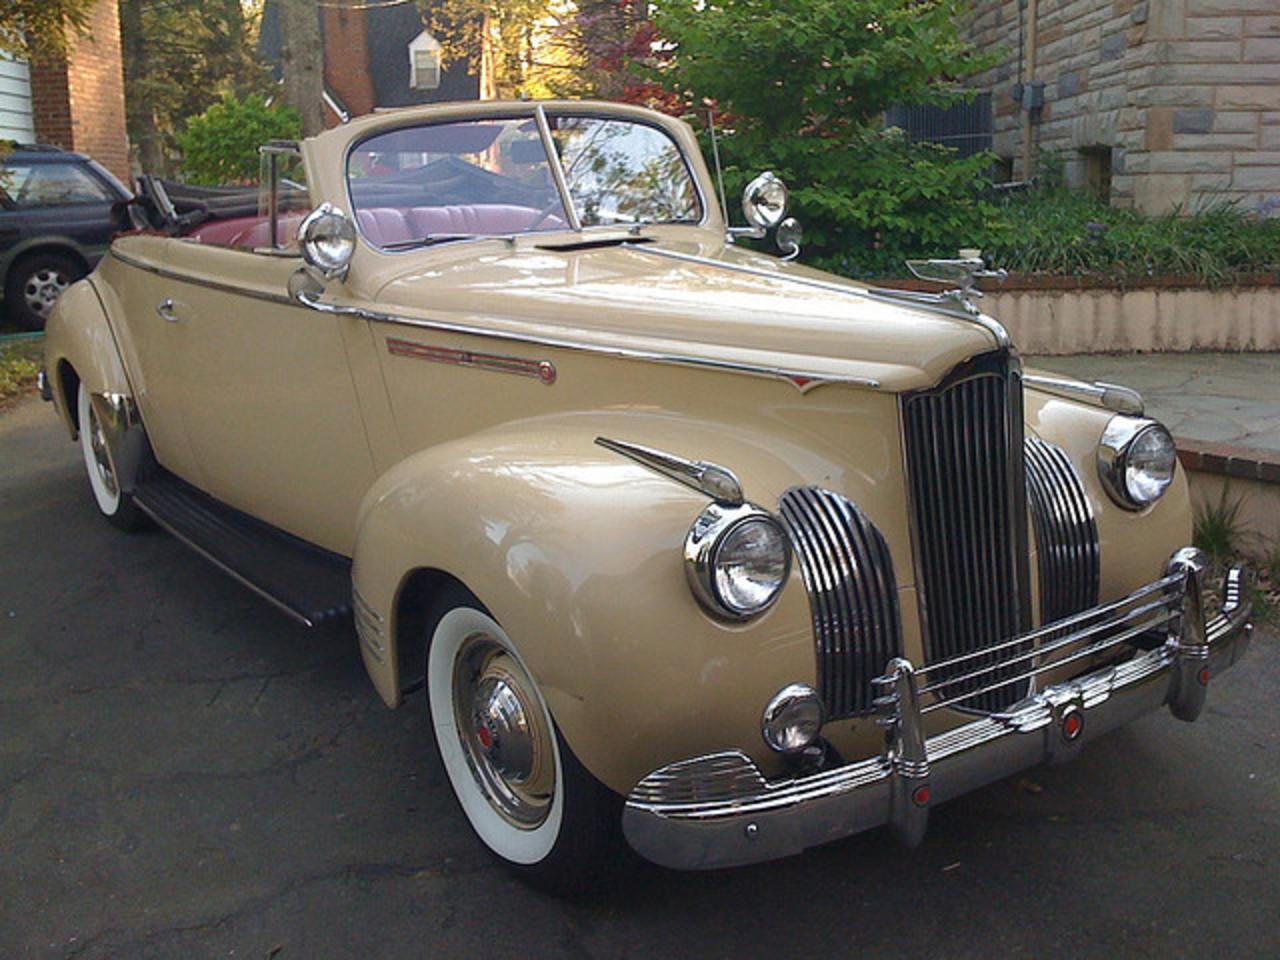 1941 Packard 110 Convertible Coupe | Flickr - Photo Sharing!